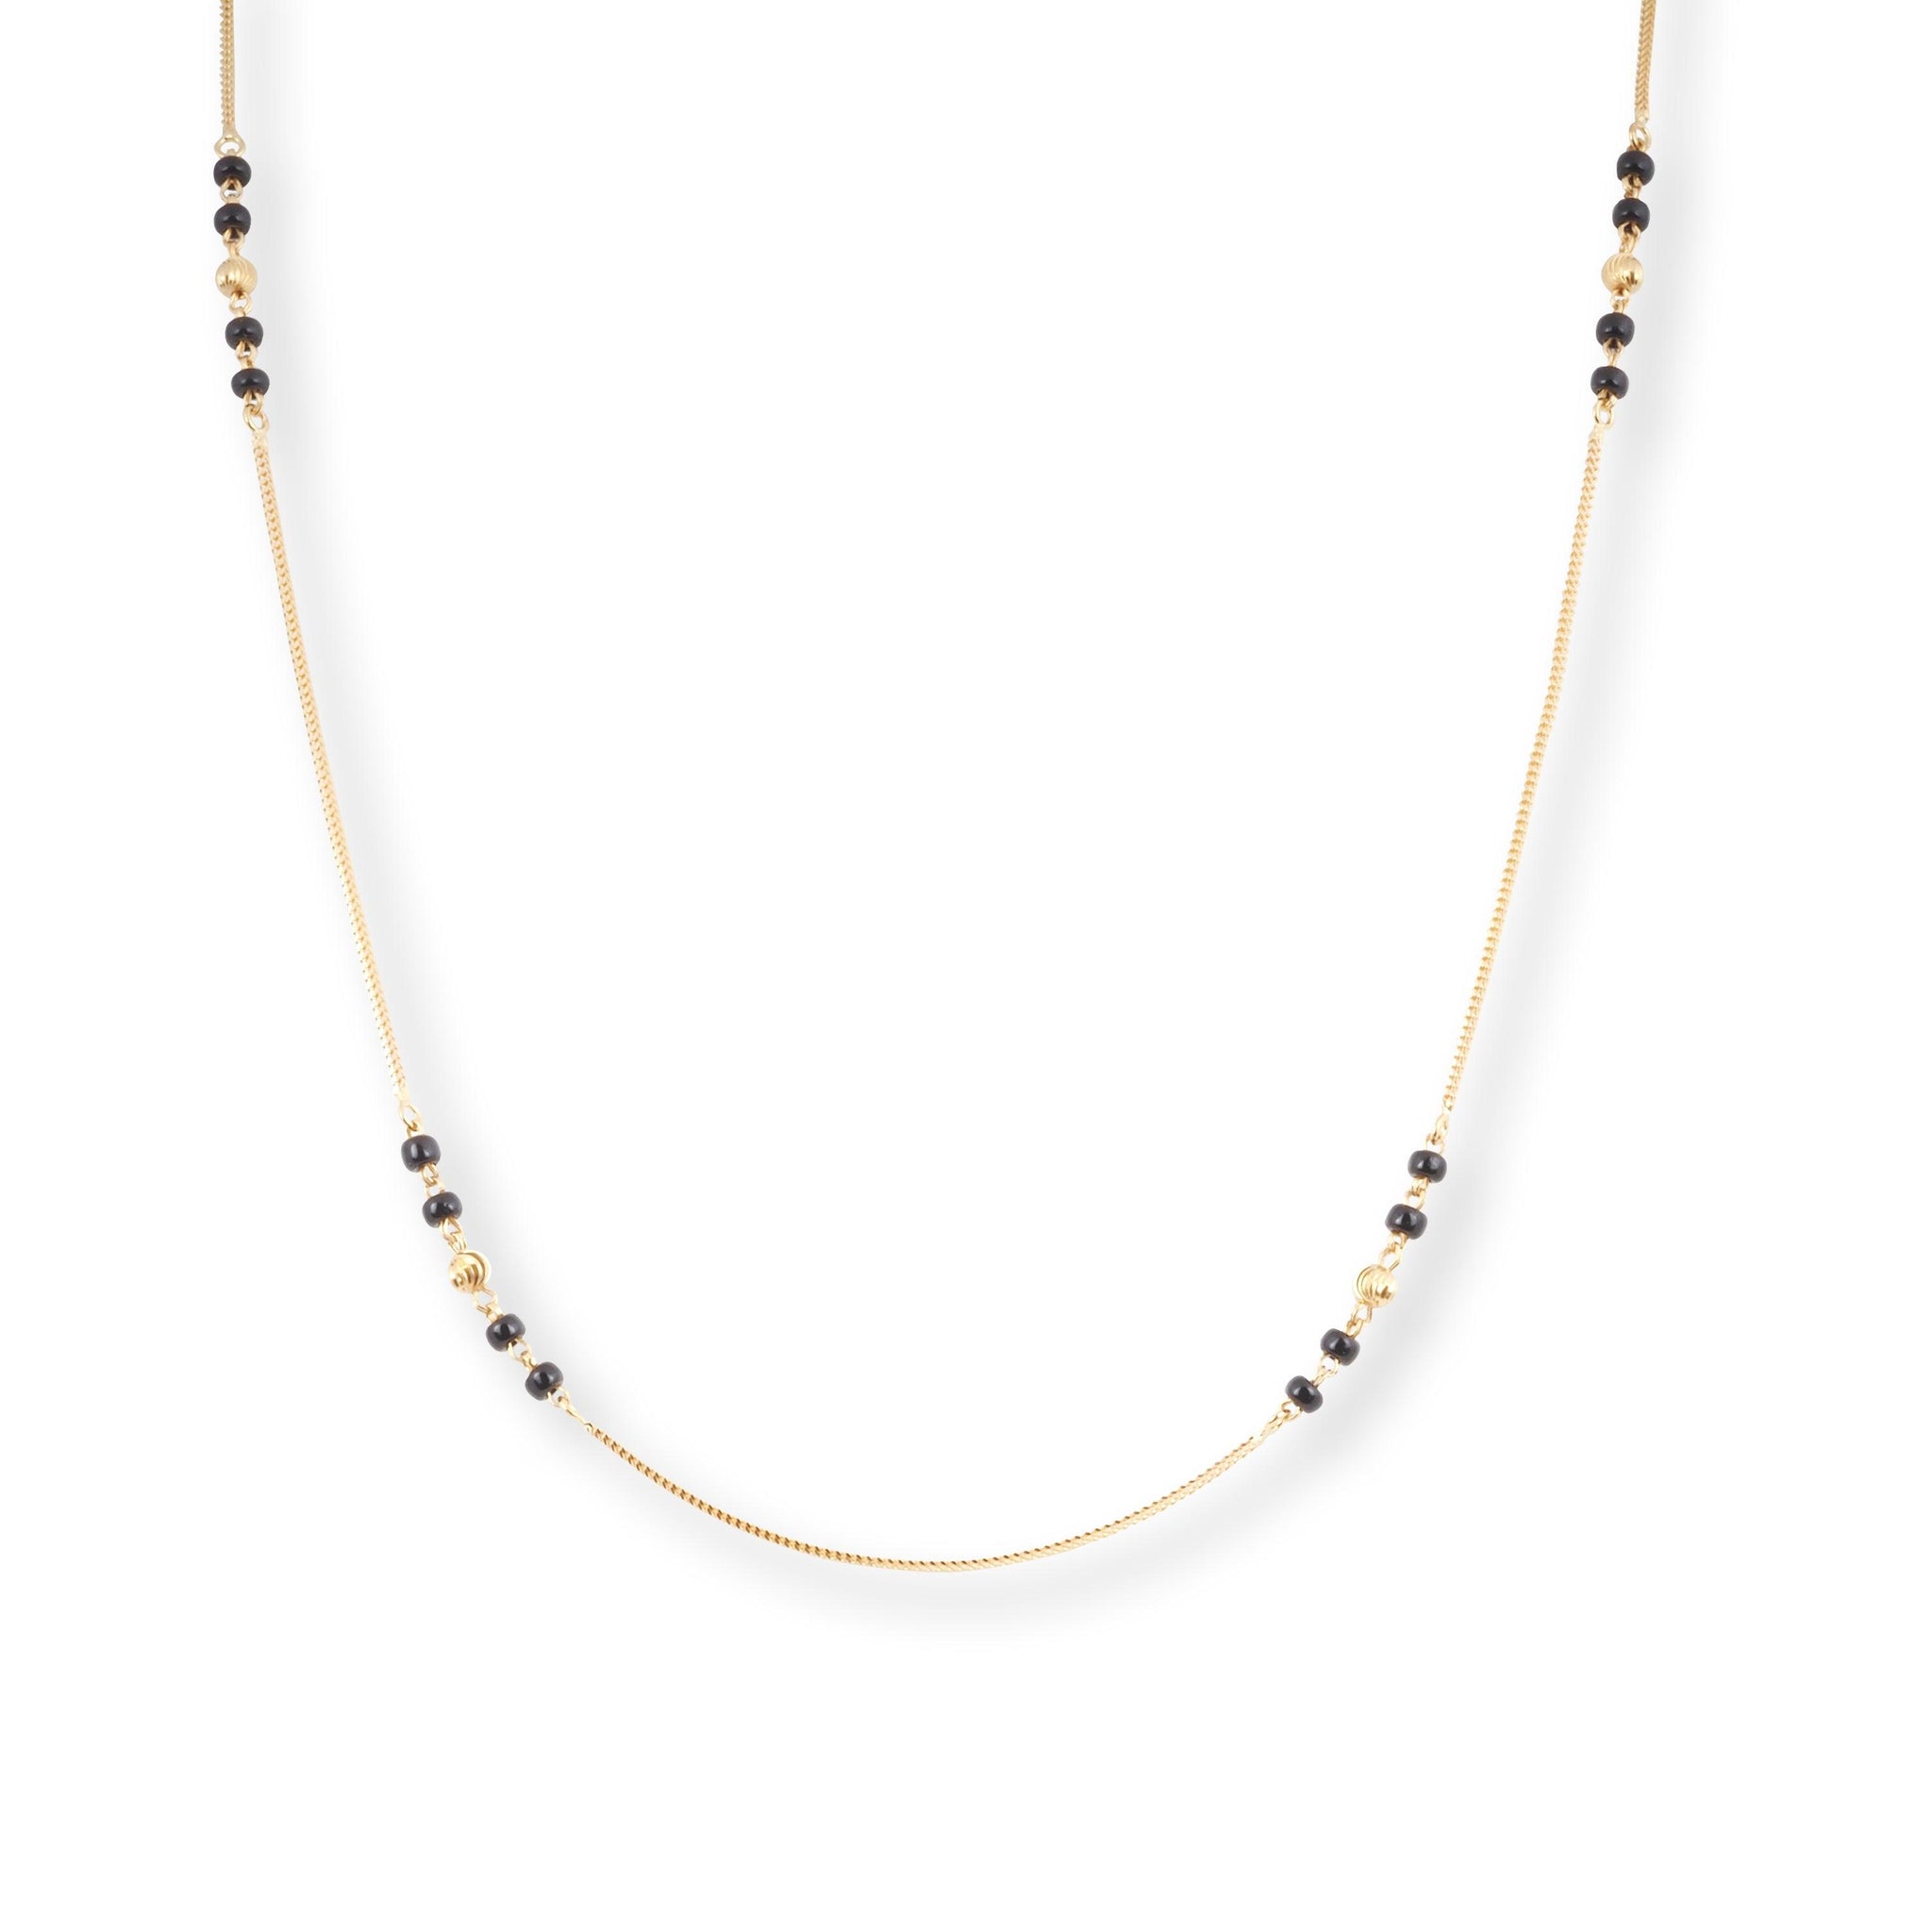 22ct Gold Foxtail Chain with Black & Gold Beads at Intervals with Bolt Ring Clasp C-3818